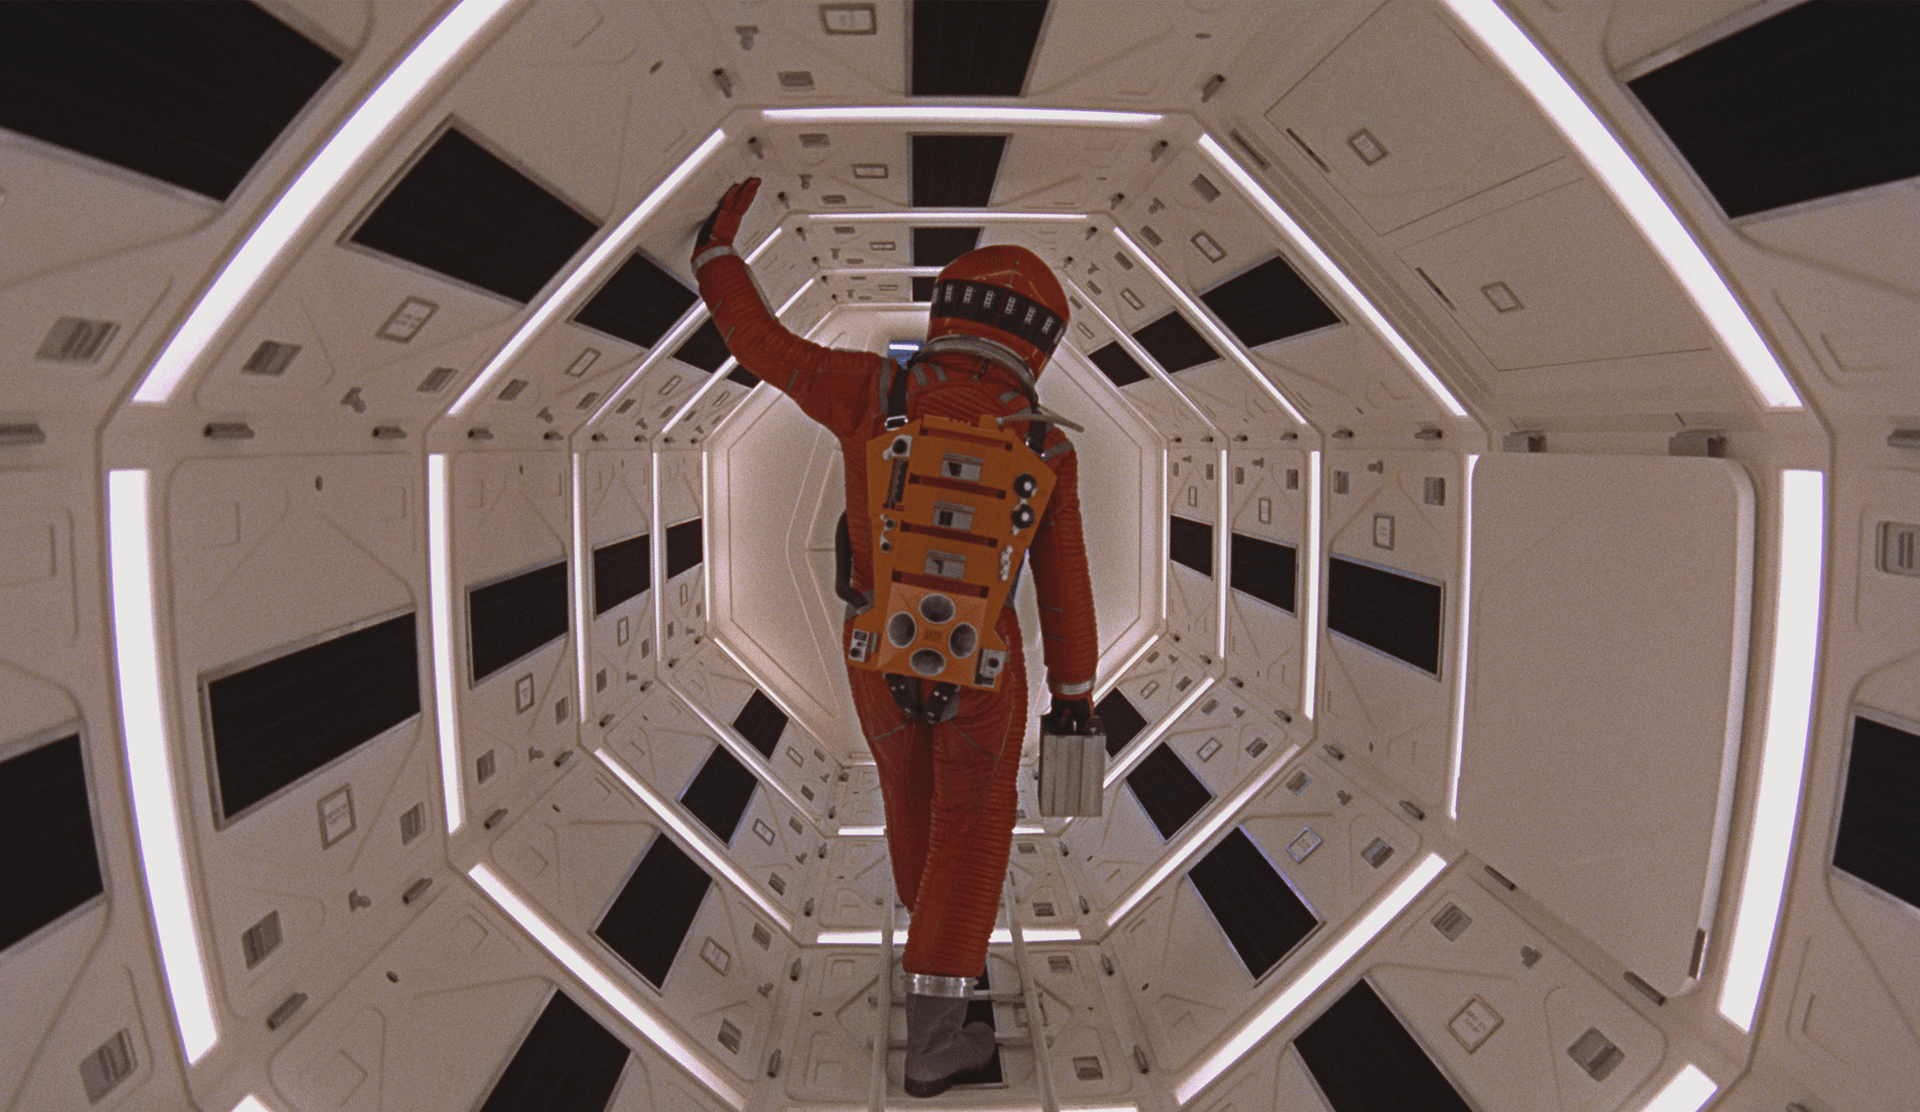 2001: A Space Odyssey (2018) Movie Tickets & Showtimes Near You